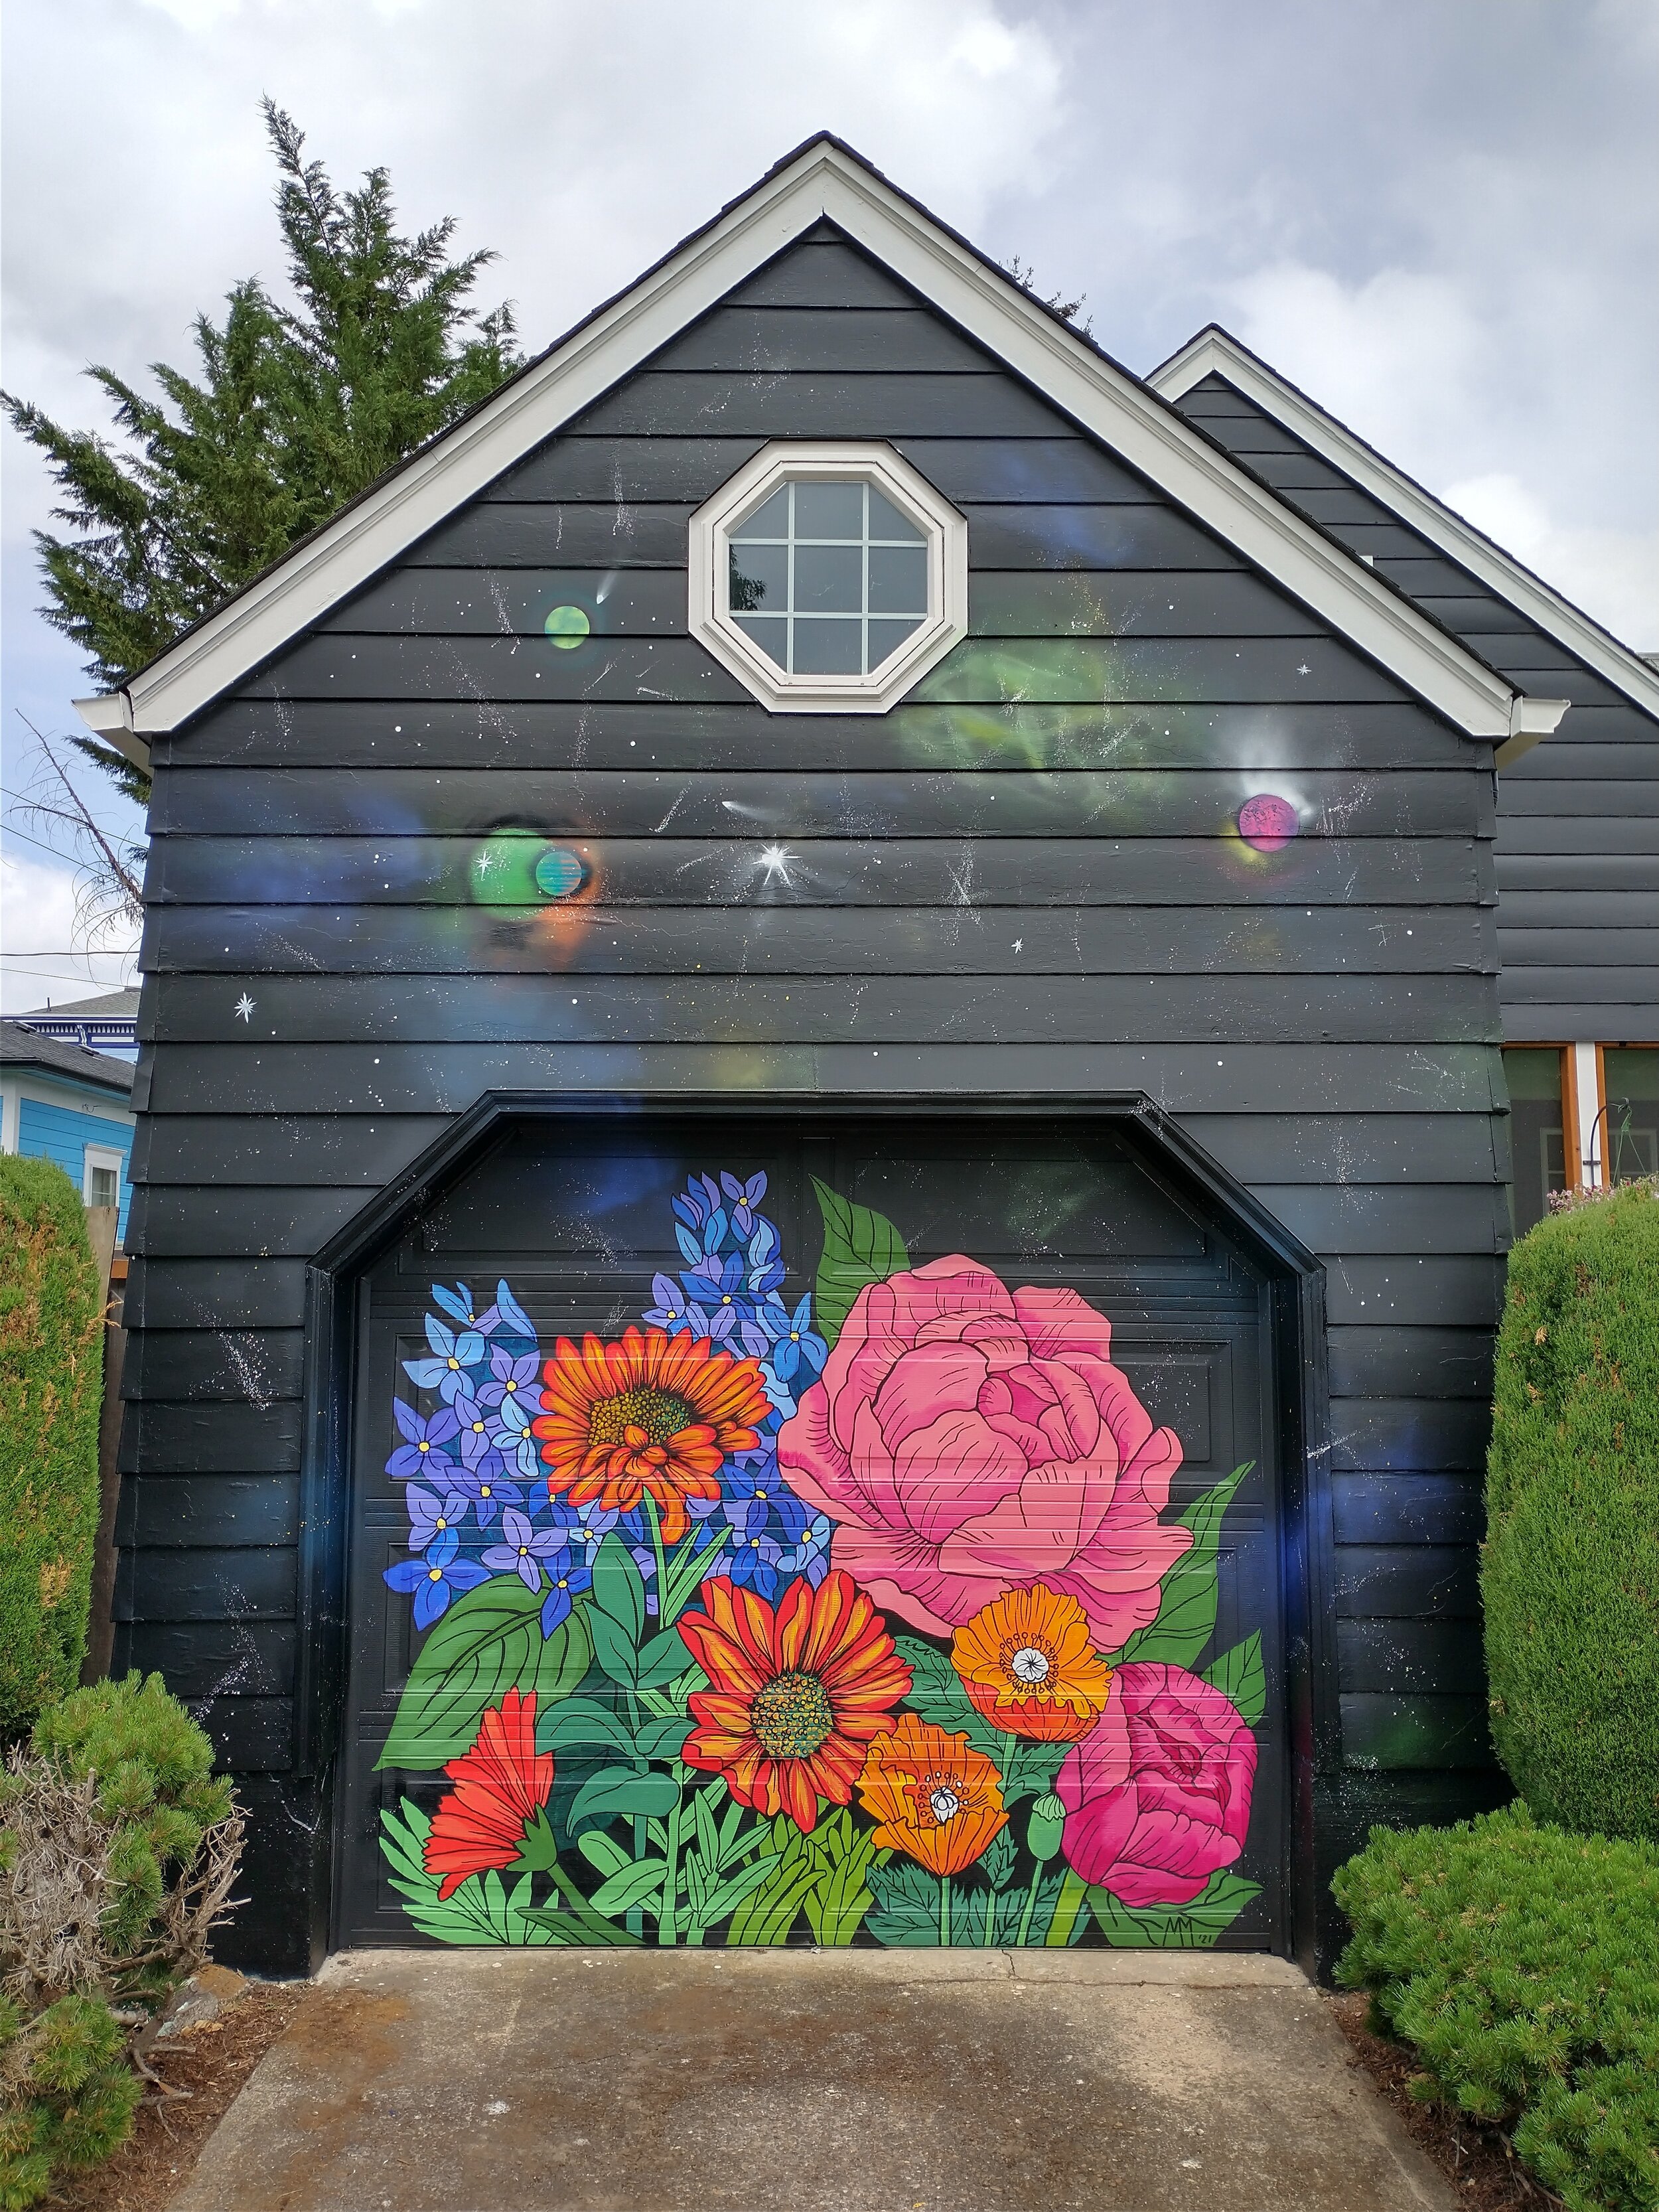 Black House with Outer Space and Northwest Flowers